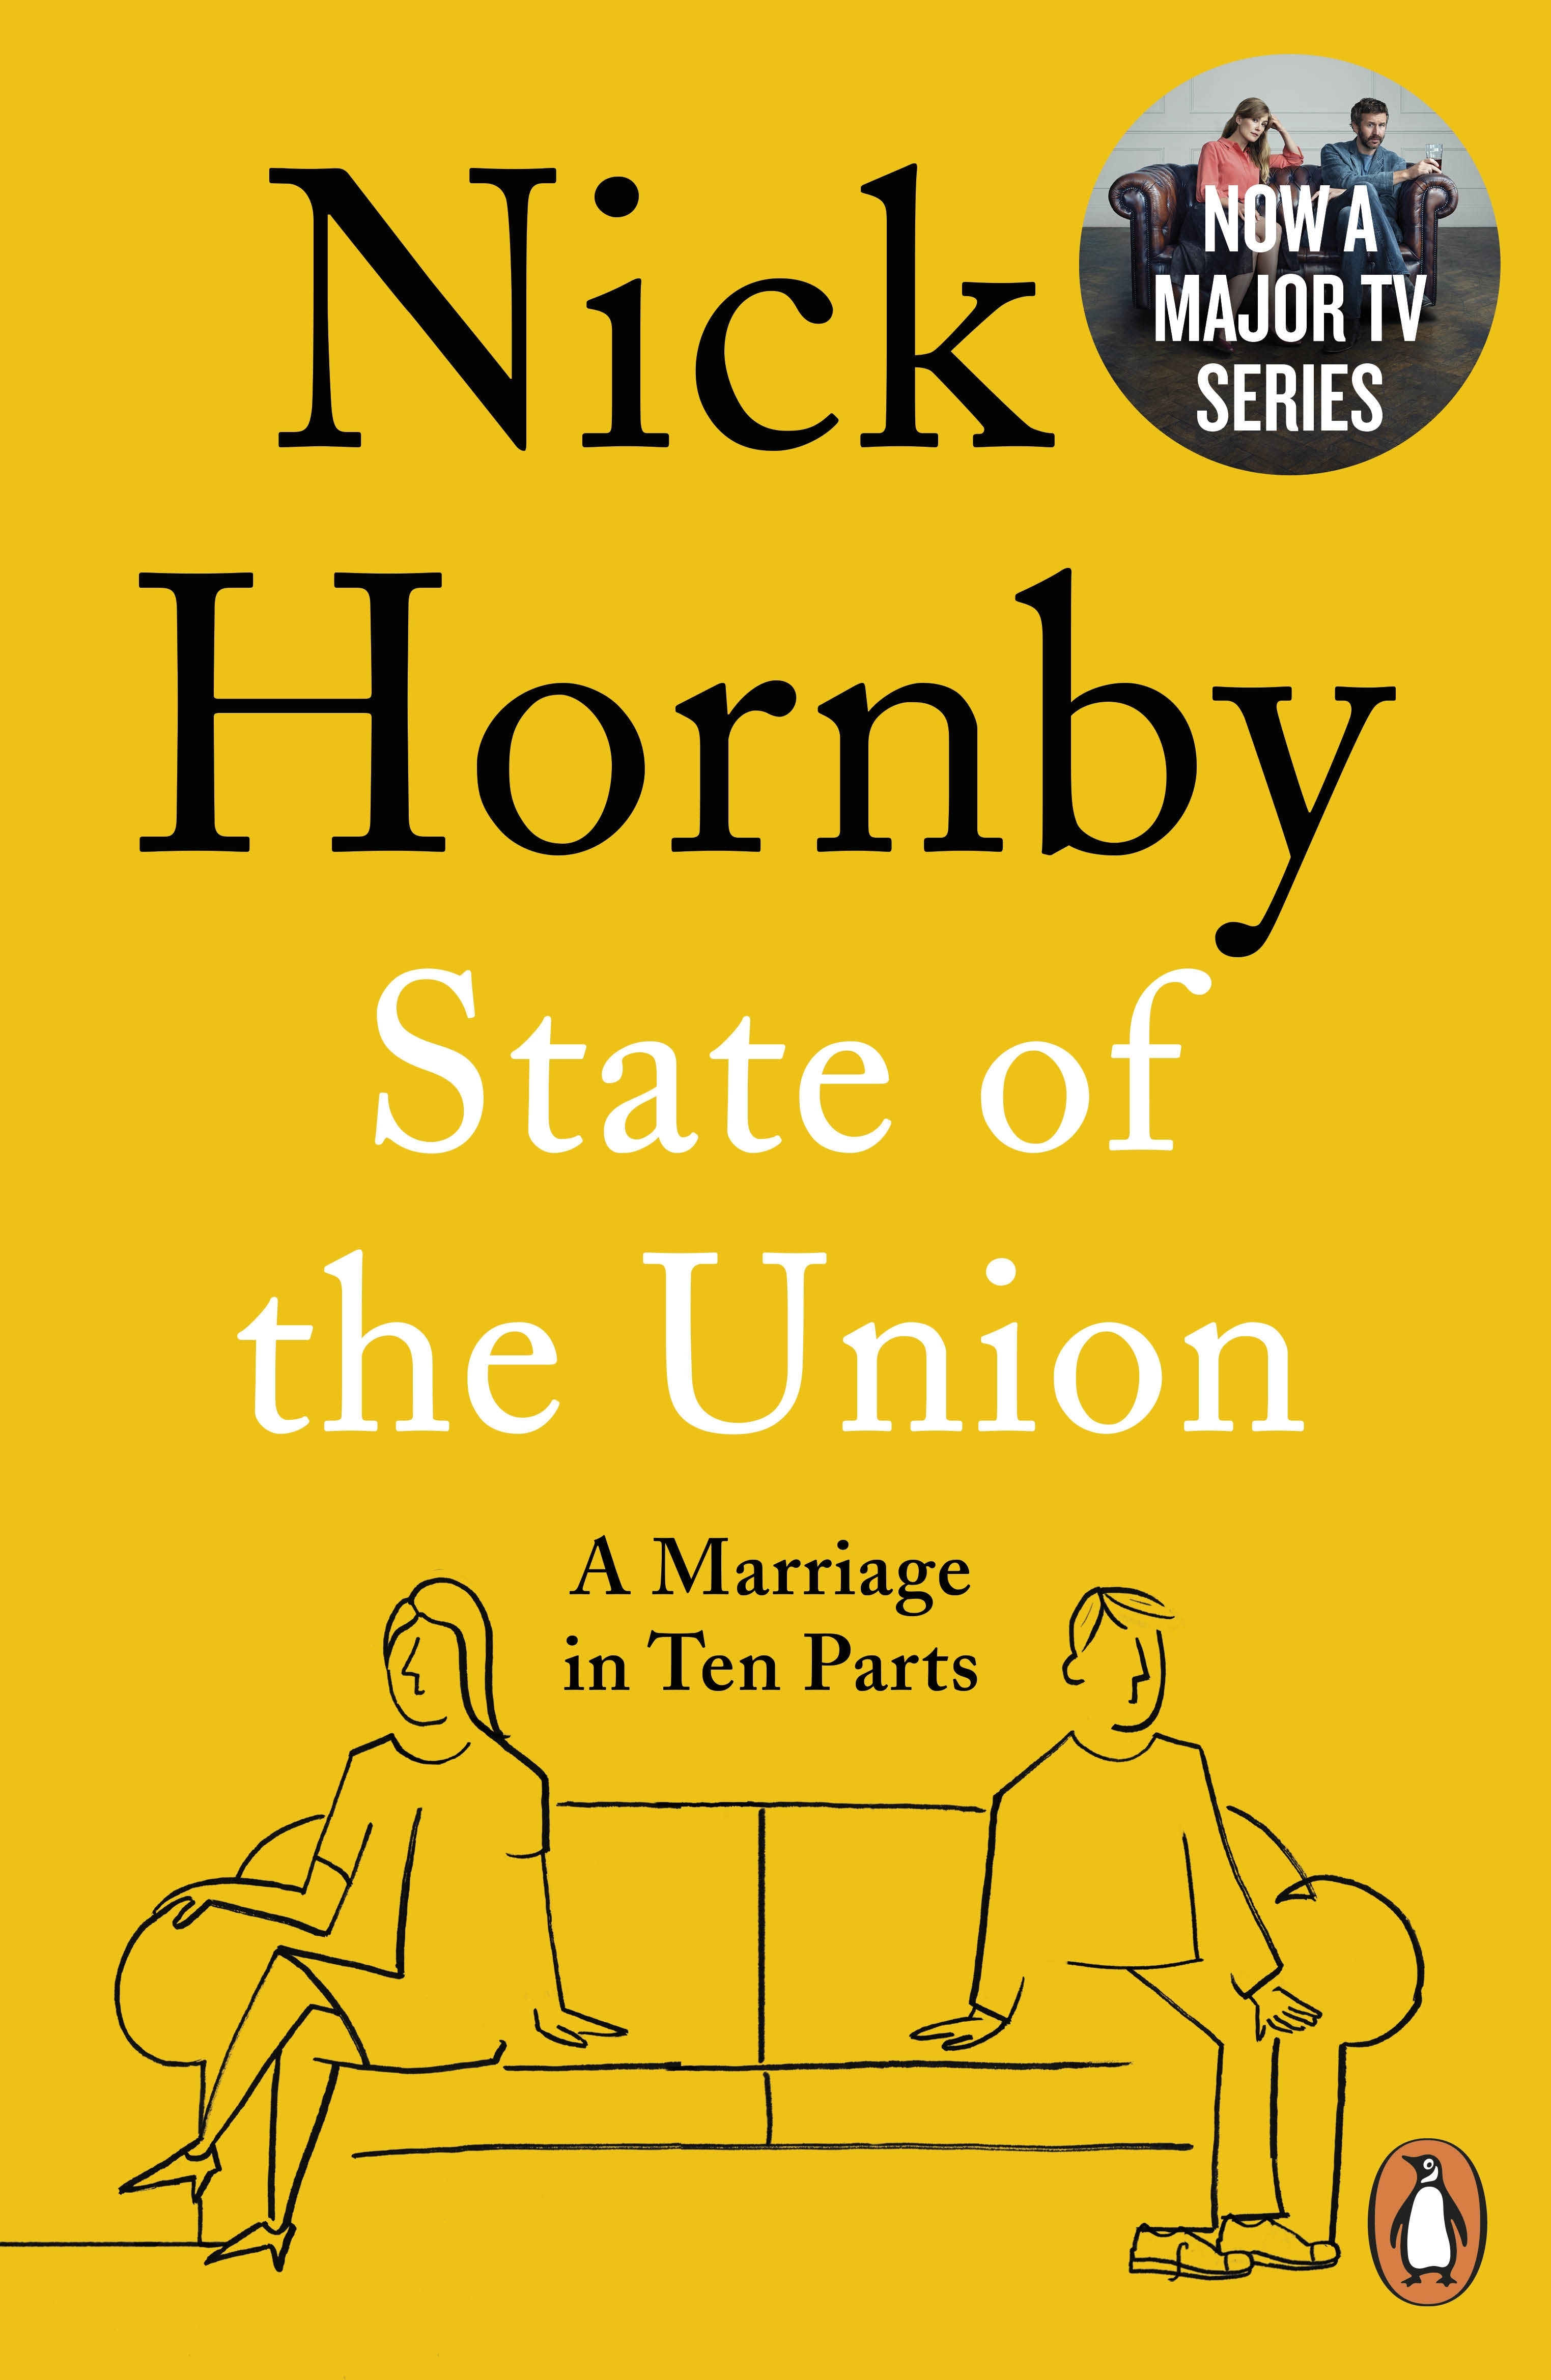 Book “State of the Union” by Nick Hornby — August 22, 2019